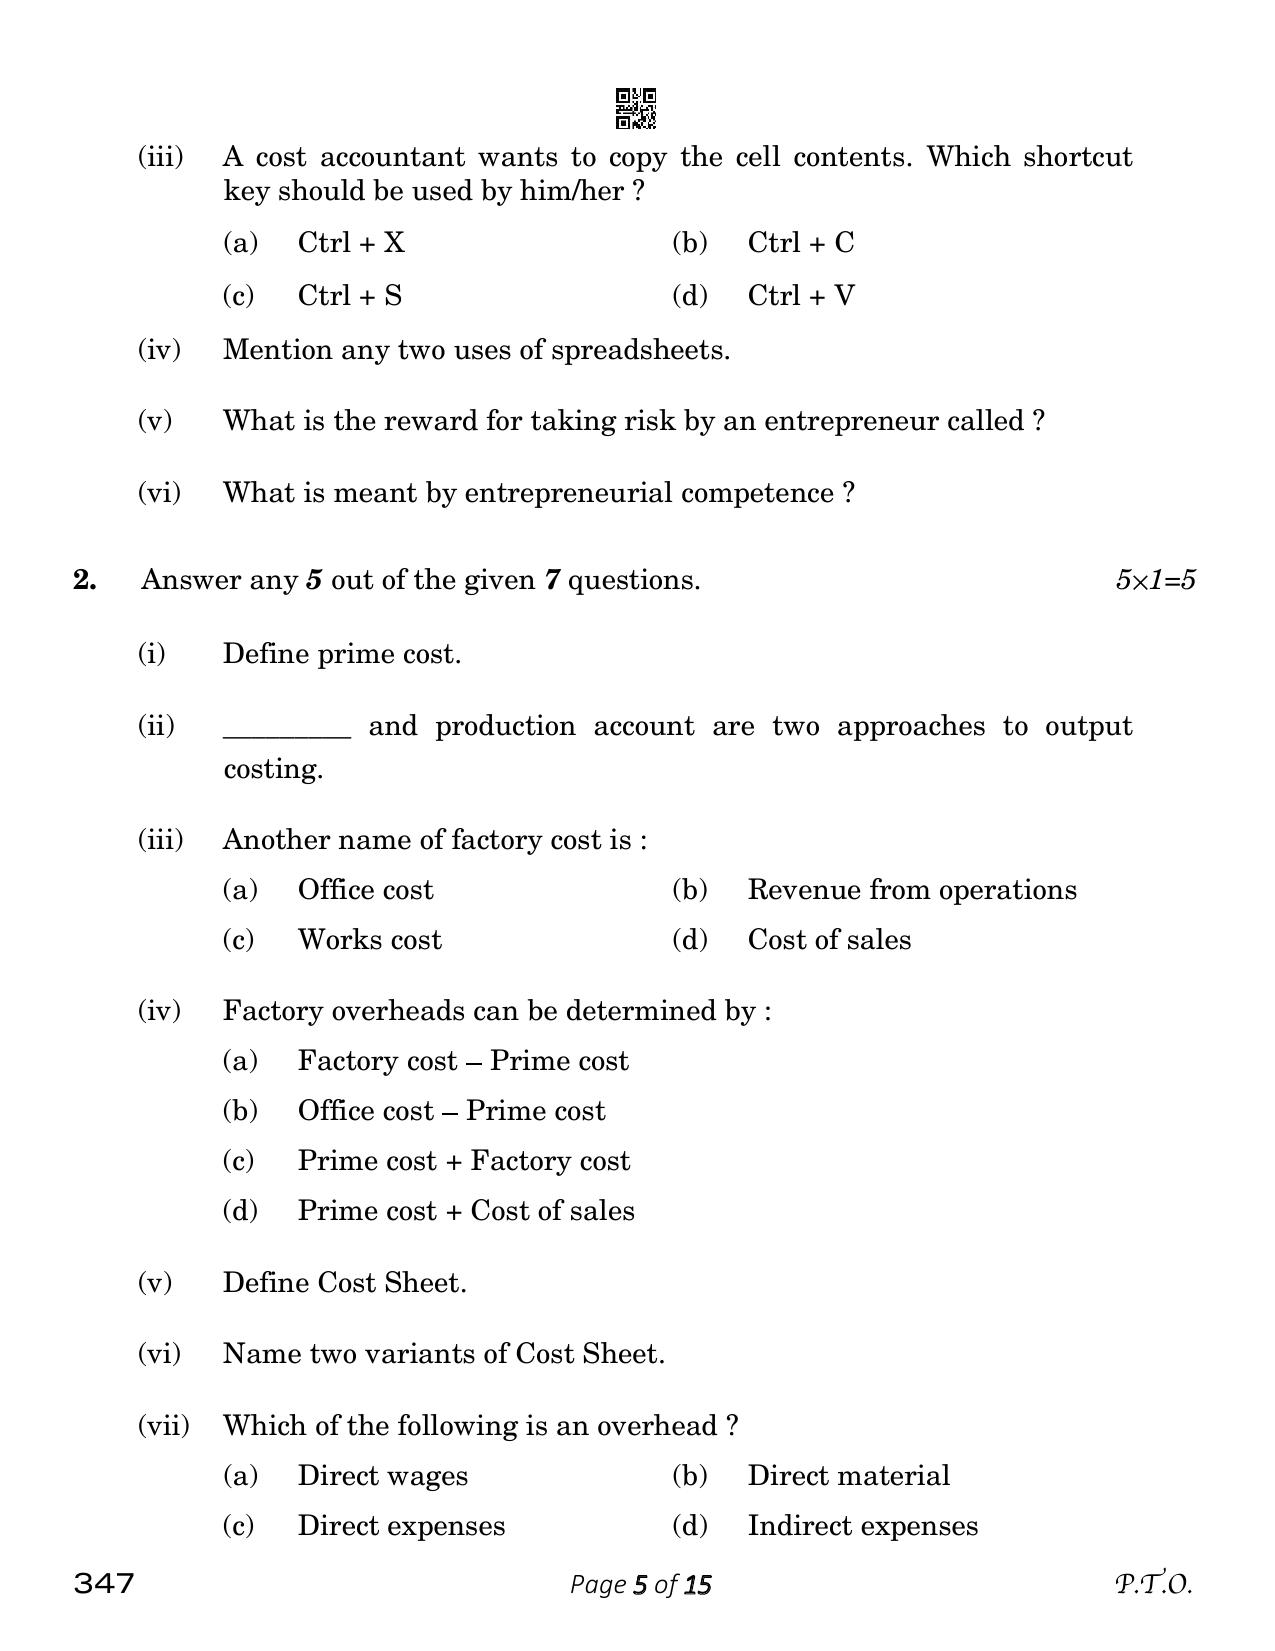 CBSE Class 12 Cost Accounting (Compartment) 2023 Question Paper - Page 5